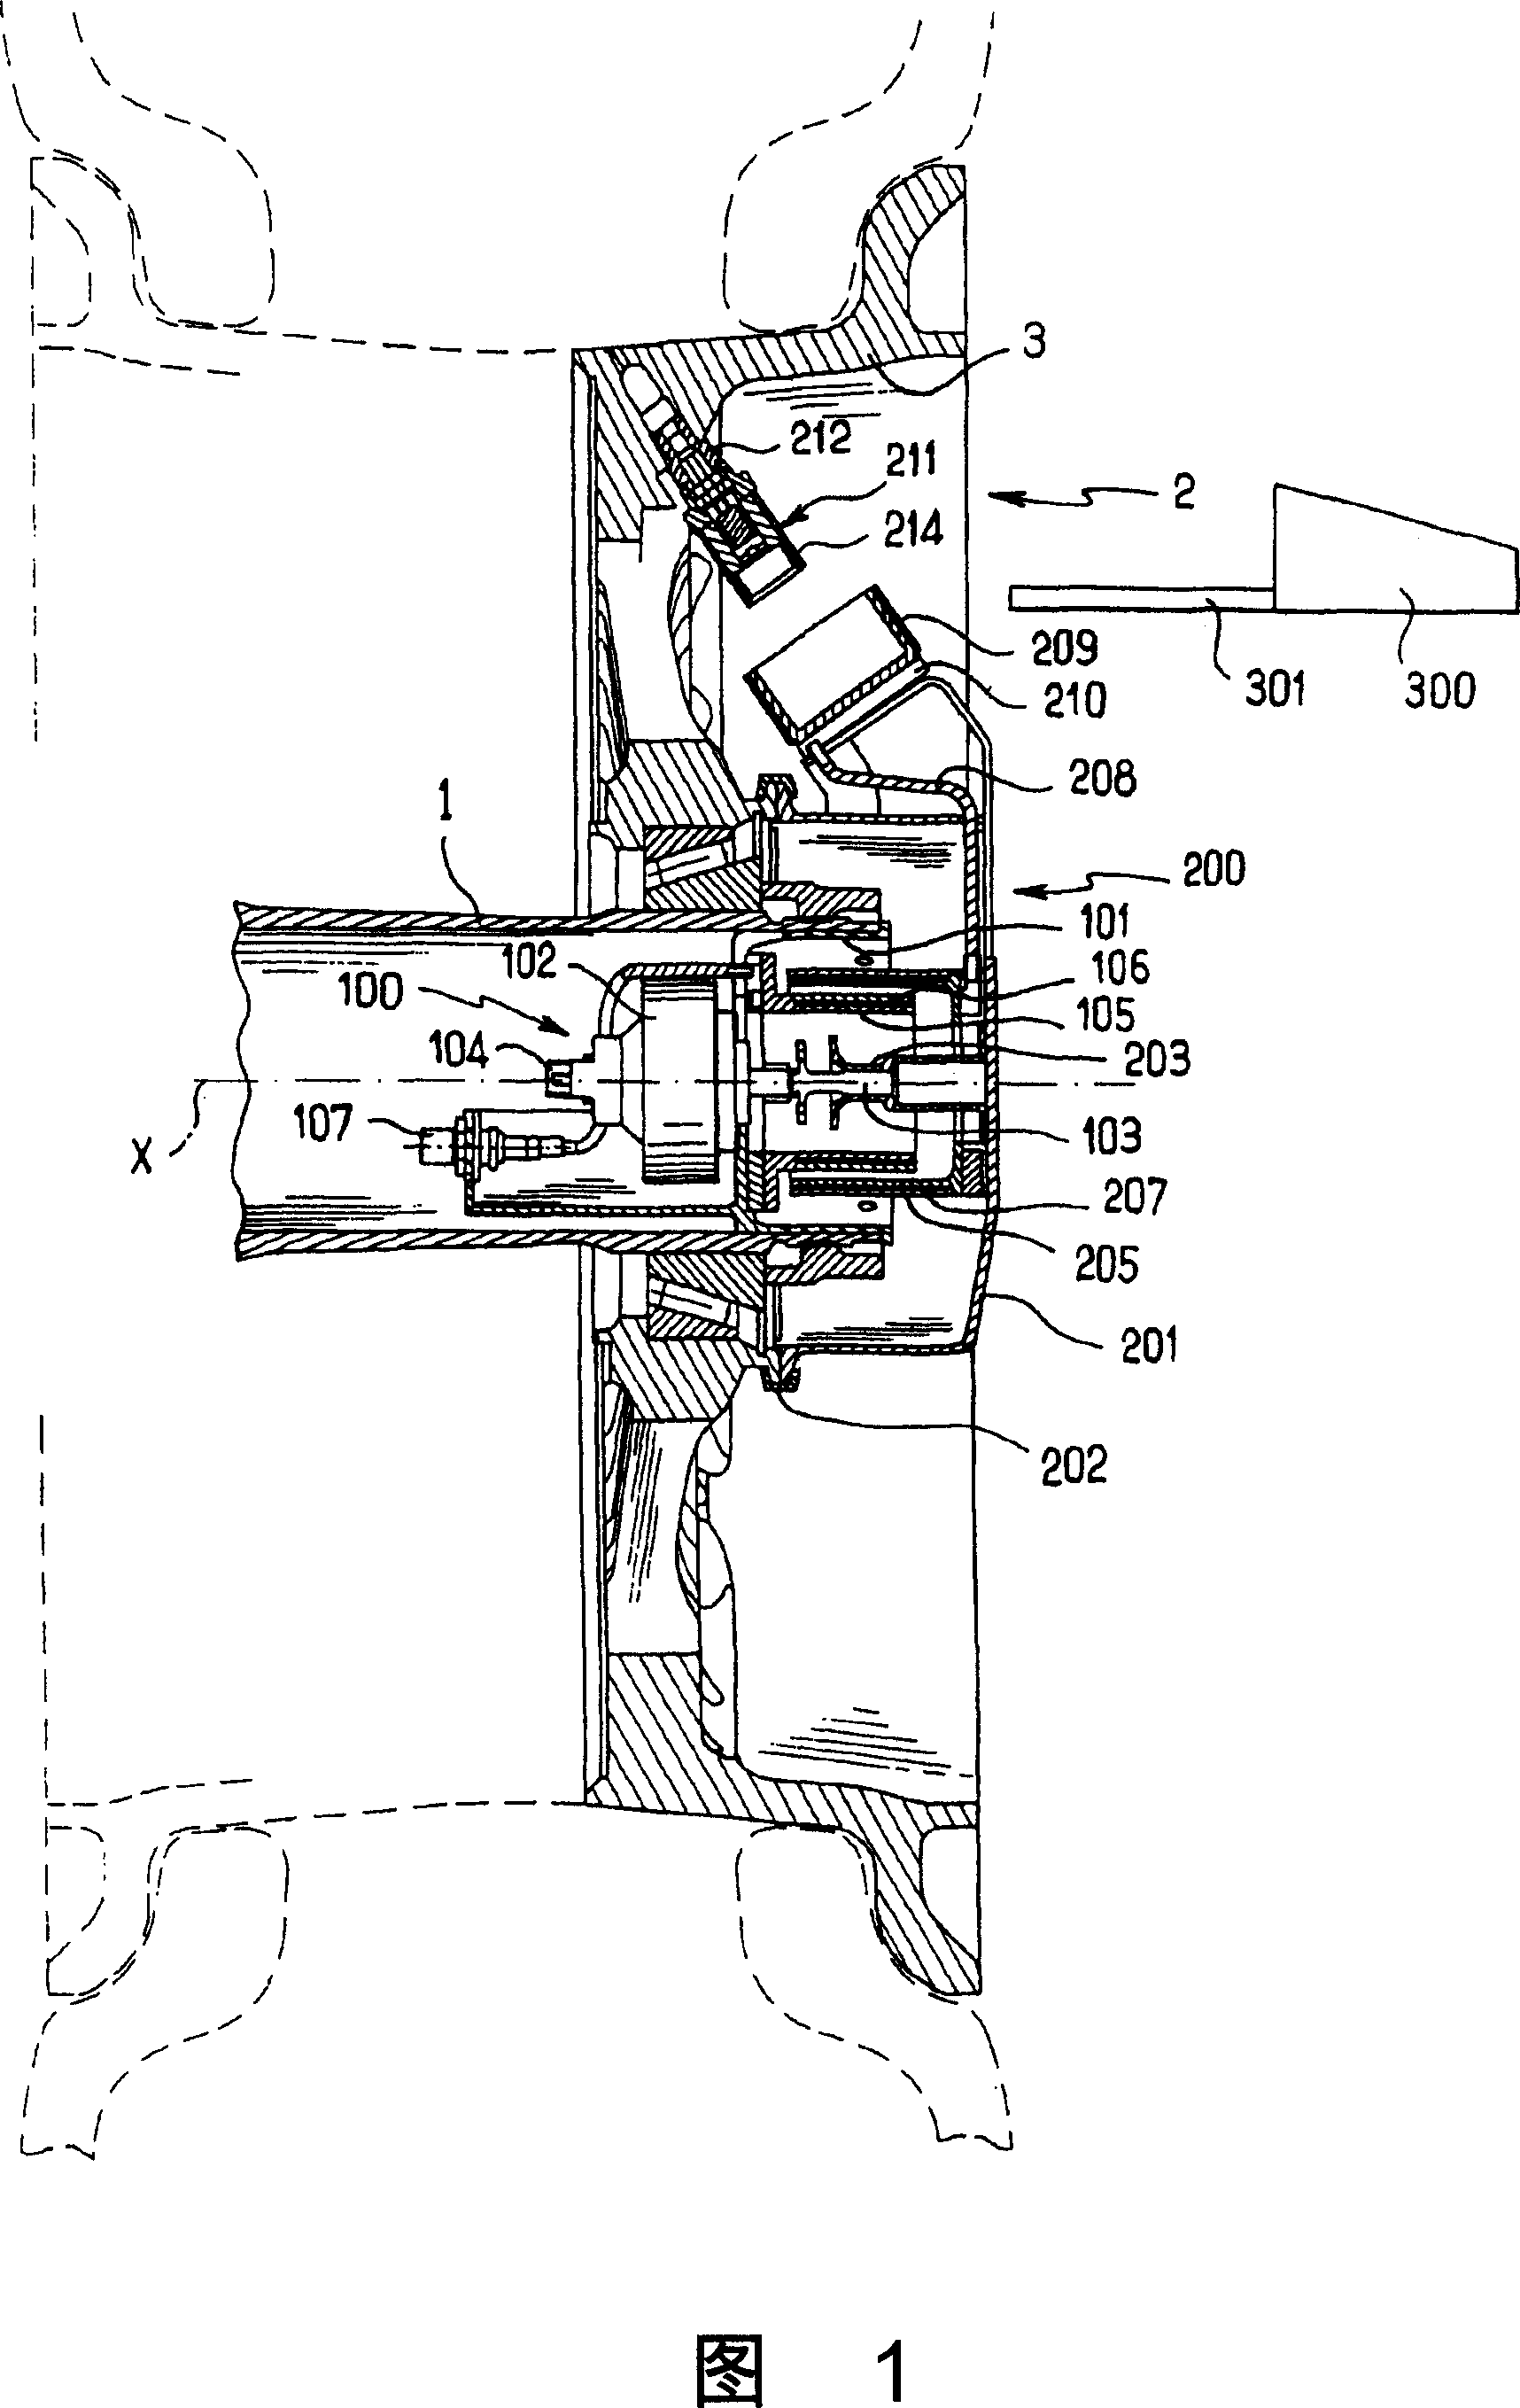 End portion of an axle of a vehicle, especially for aircrafts